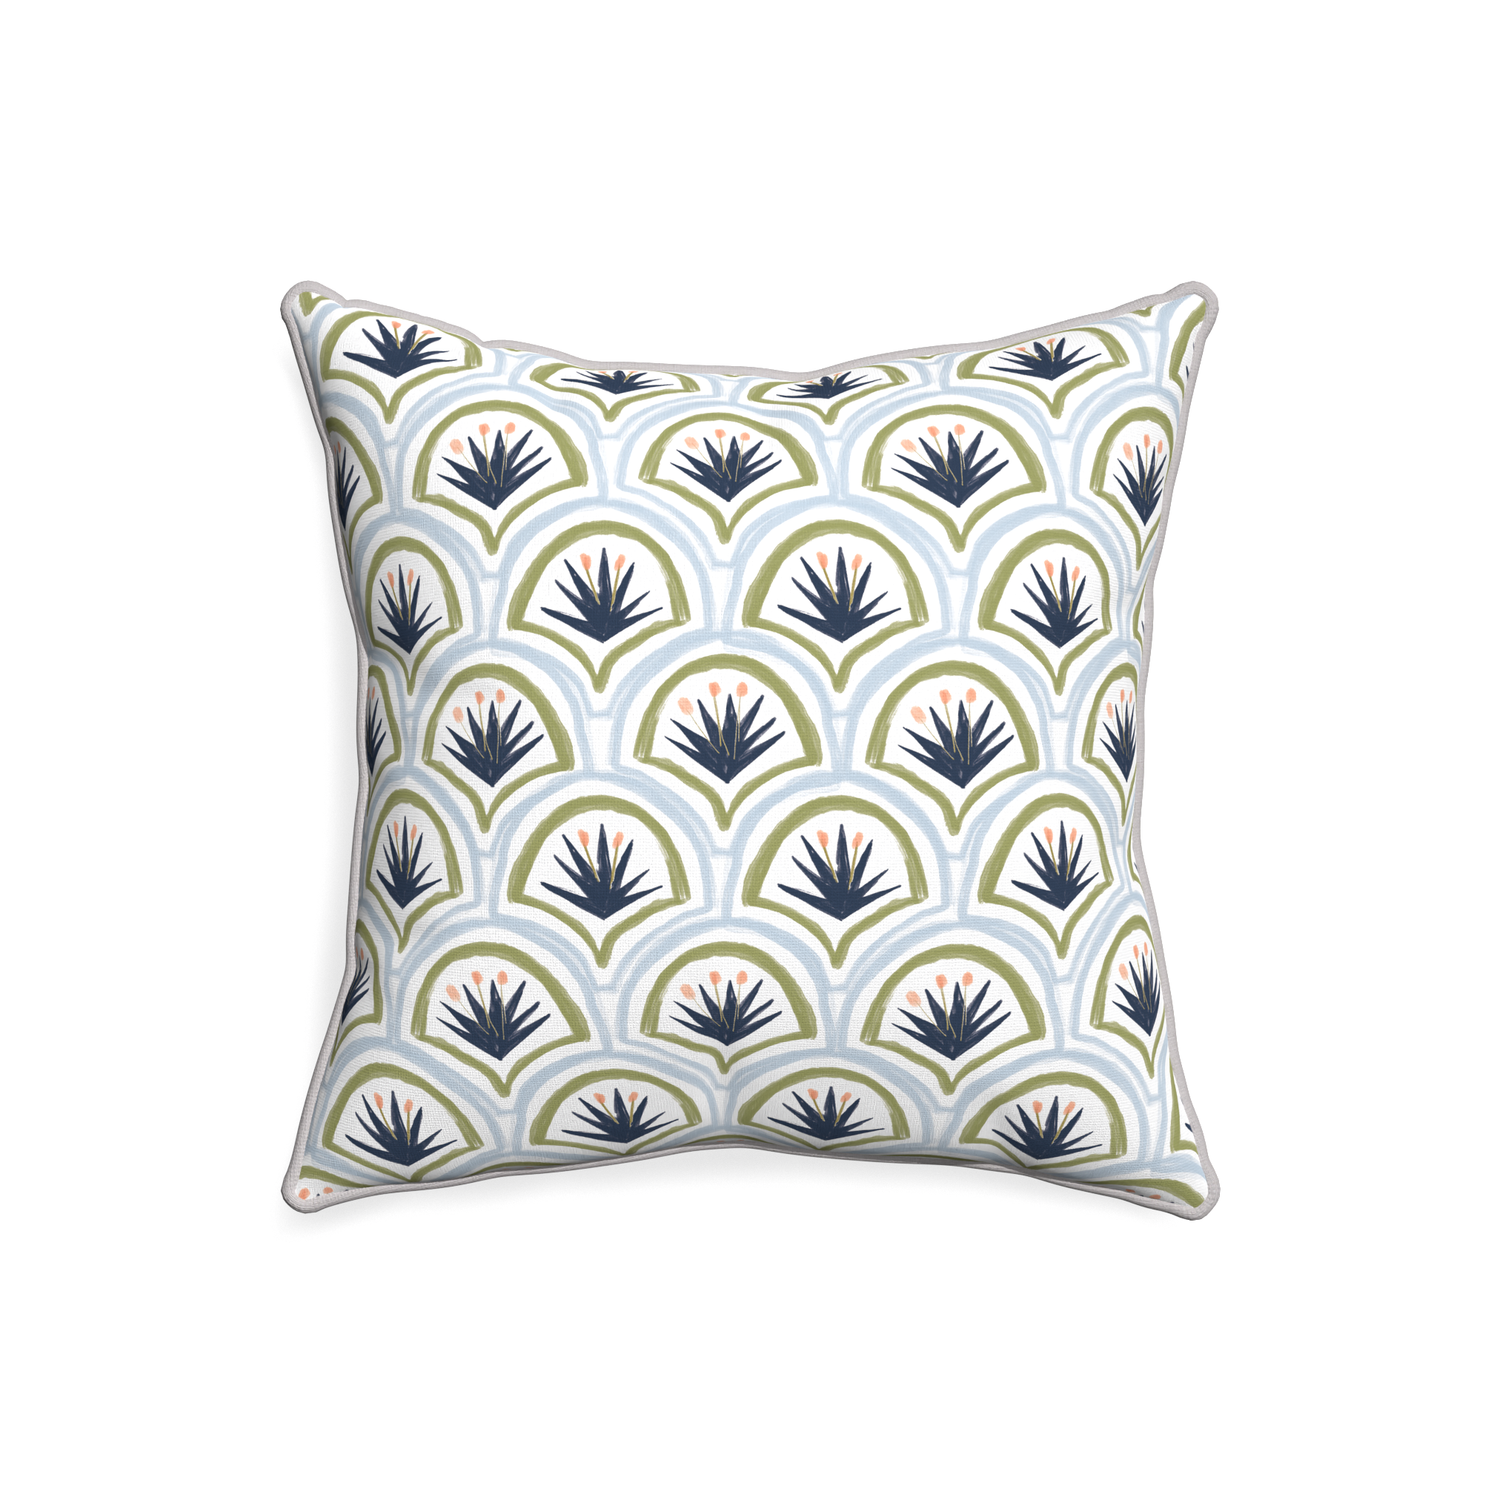 20-square thatcher midnight custom art deco palm patternpillow with pebble piping on white background